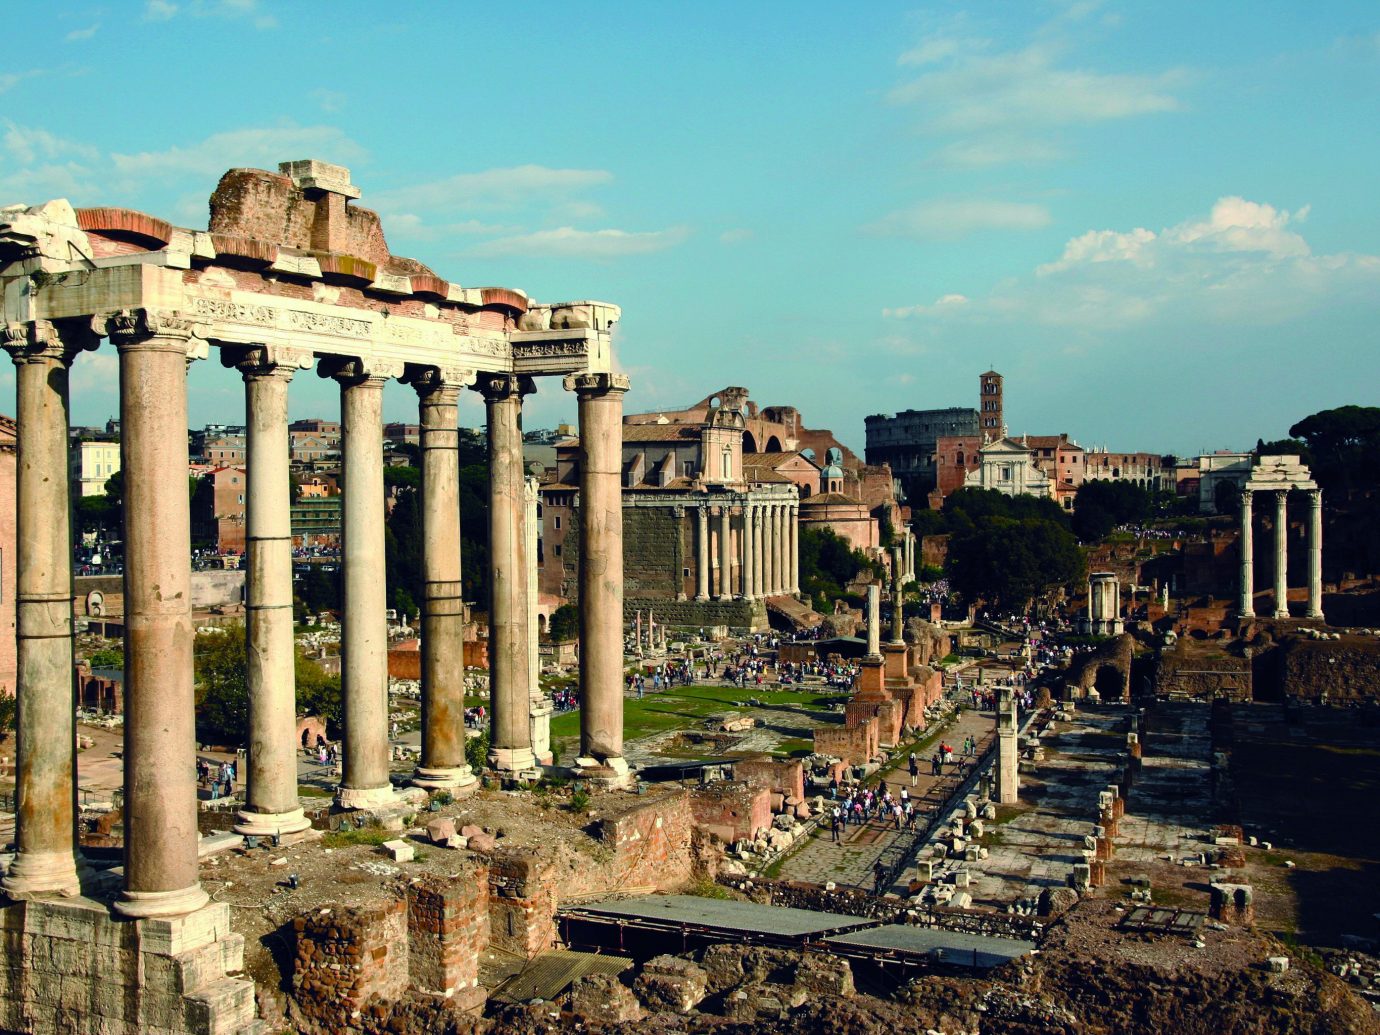 Budget Trip Ideas sky outdoor building landmark historic site Town structure ancient rome human settlement ancient history cityscape Ruins ruin ancient roman architecture palace plaza colonnade several